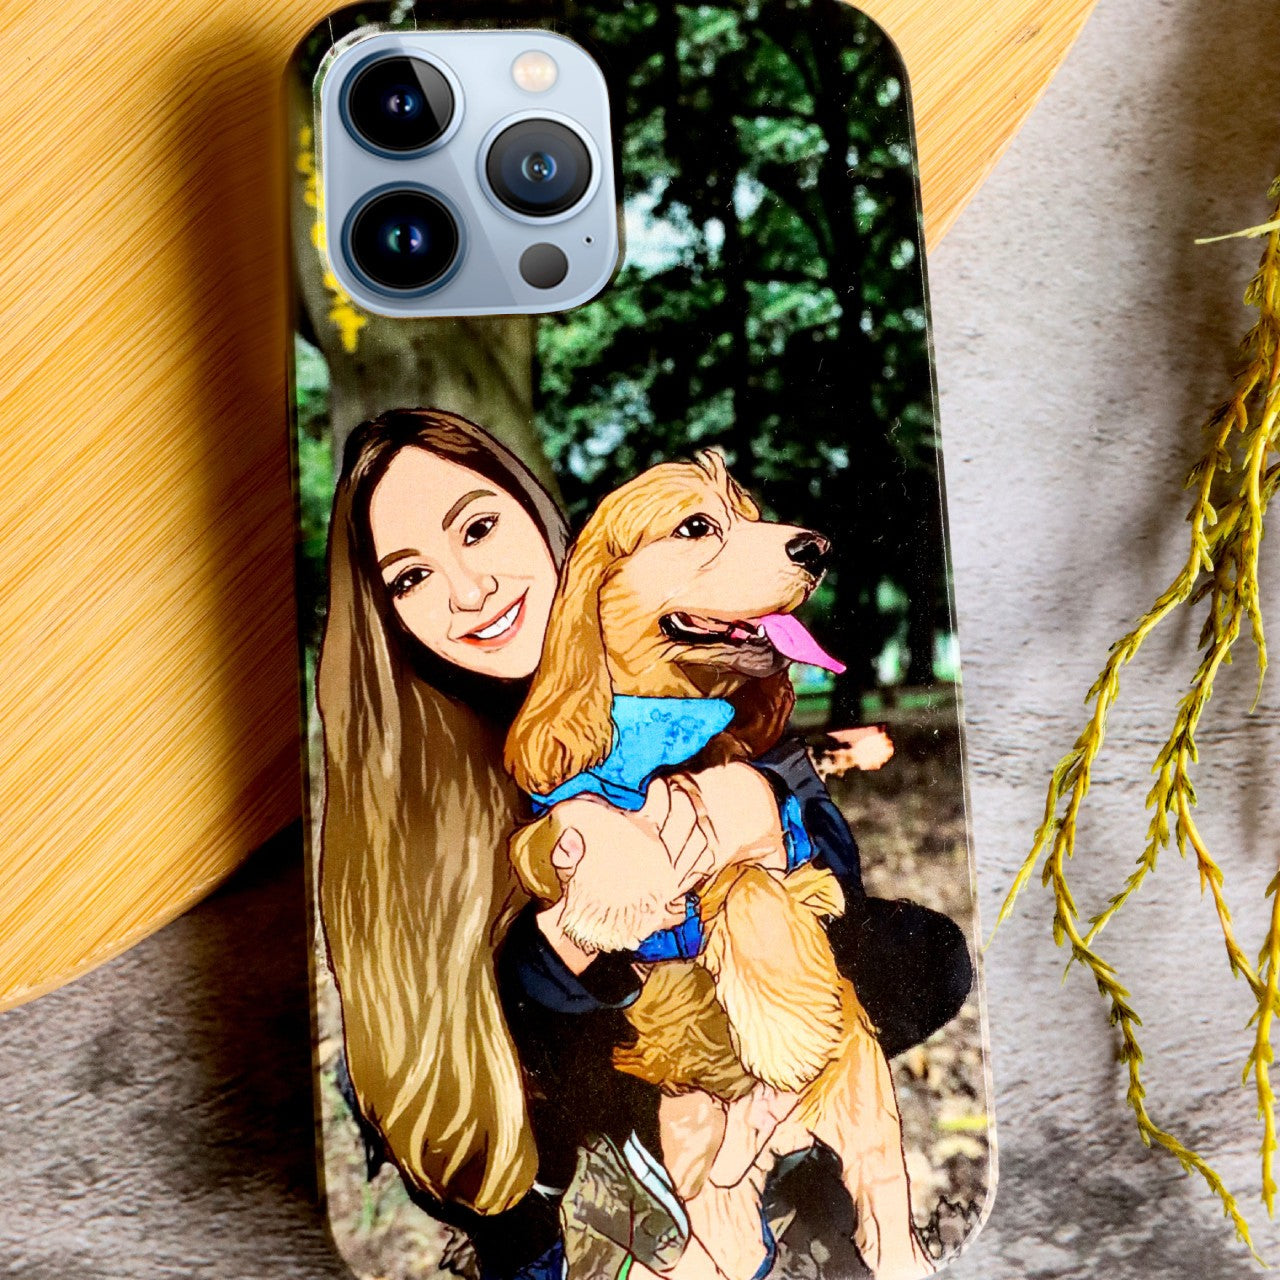 Cartoon Yourself - From Pixels to Wood, Your Story on a Phone Case